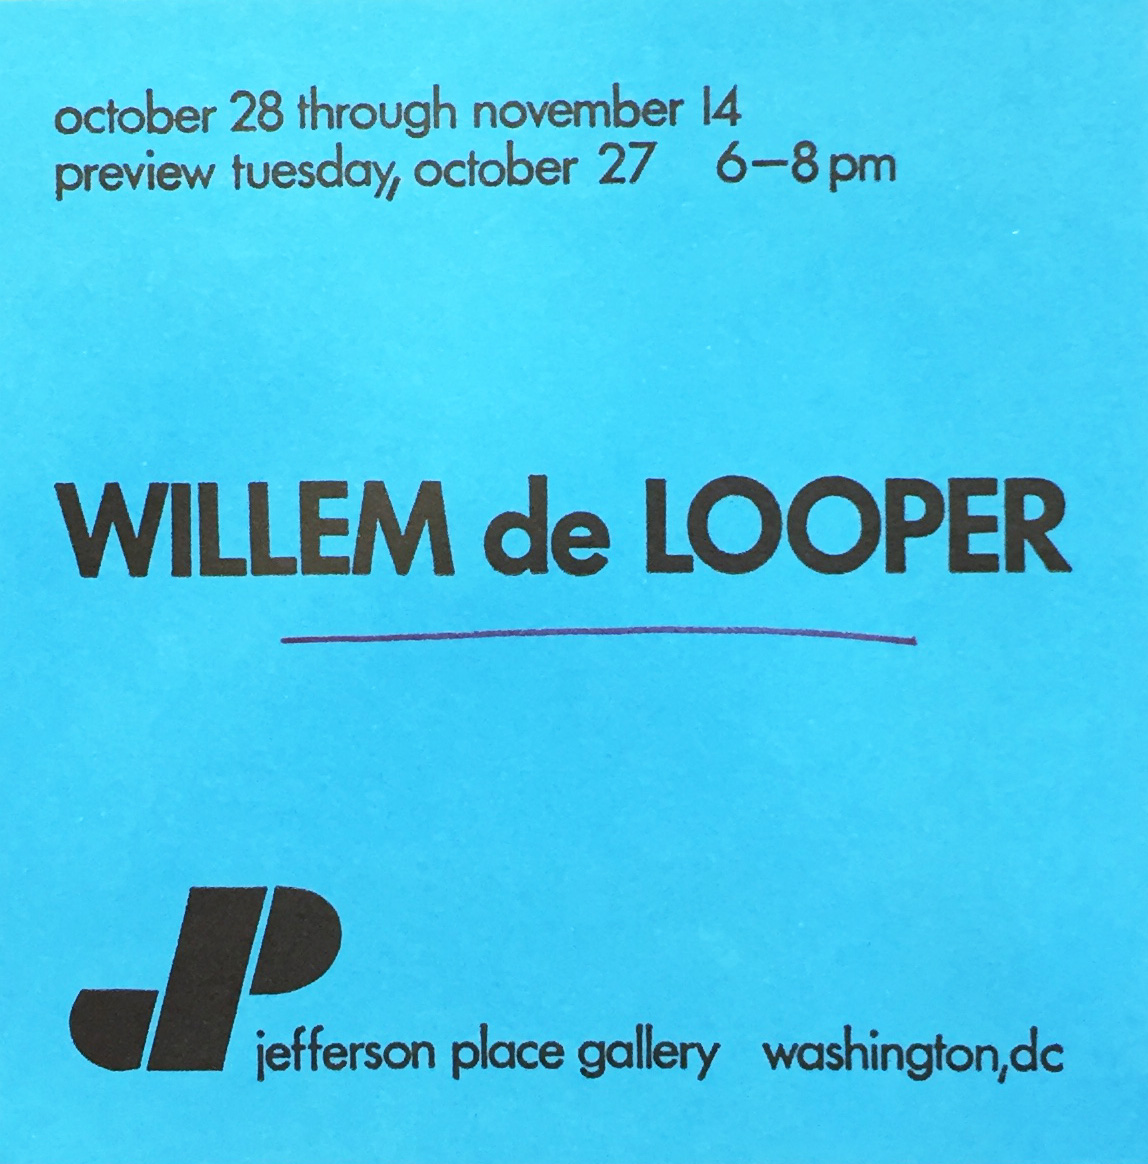 Announcement card for Willem De Looper's solo show at Jefferson Place Gallery